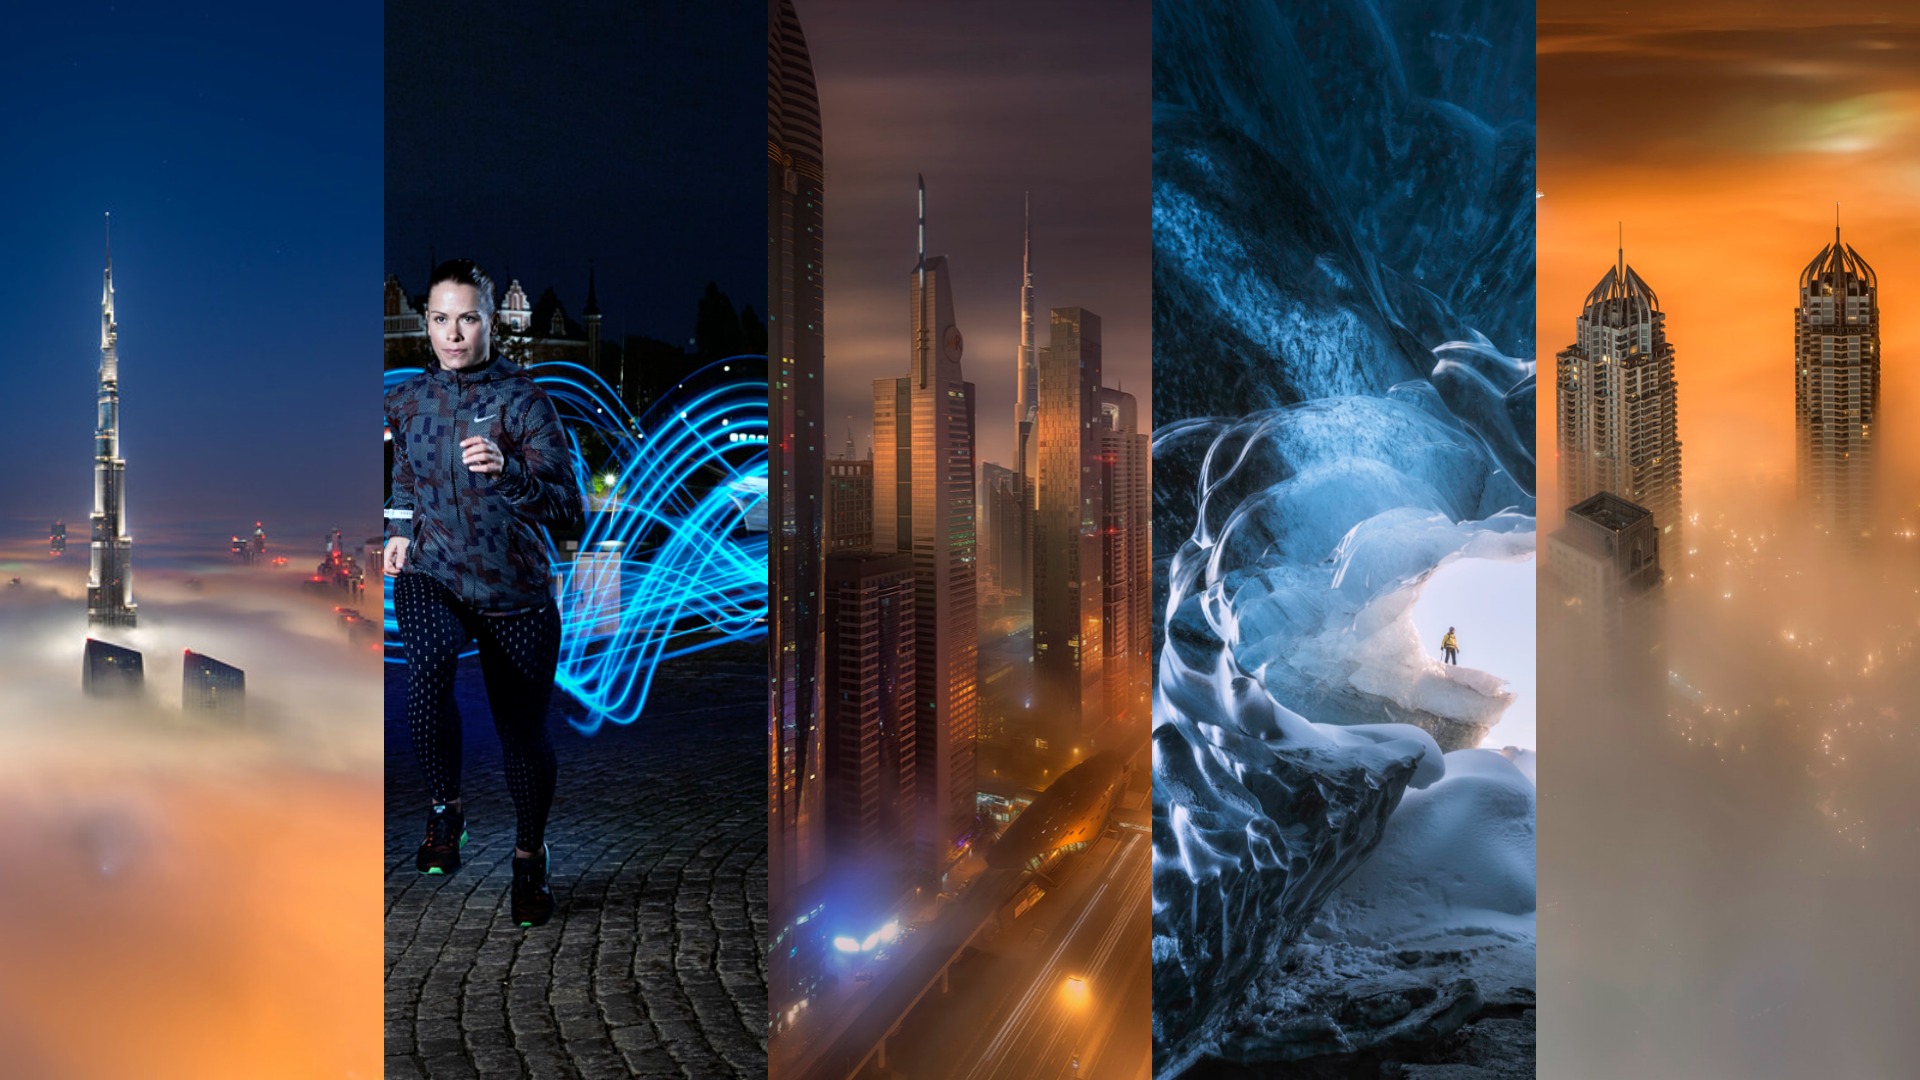 Introducing Our New 500px Ambassadors